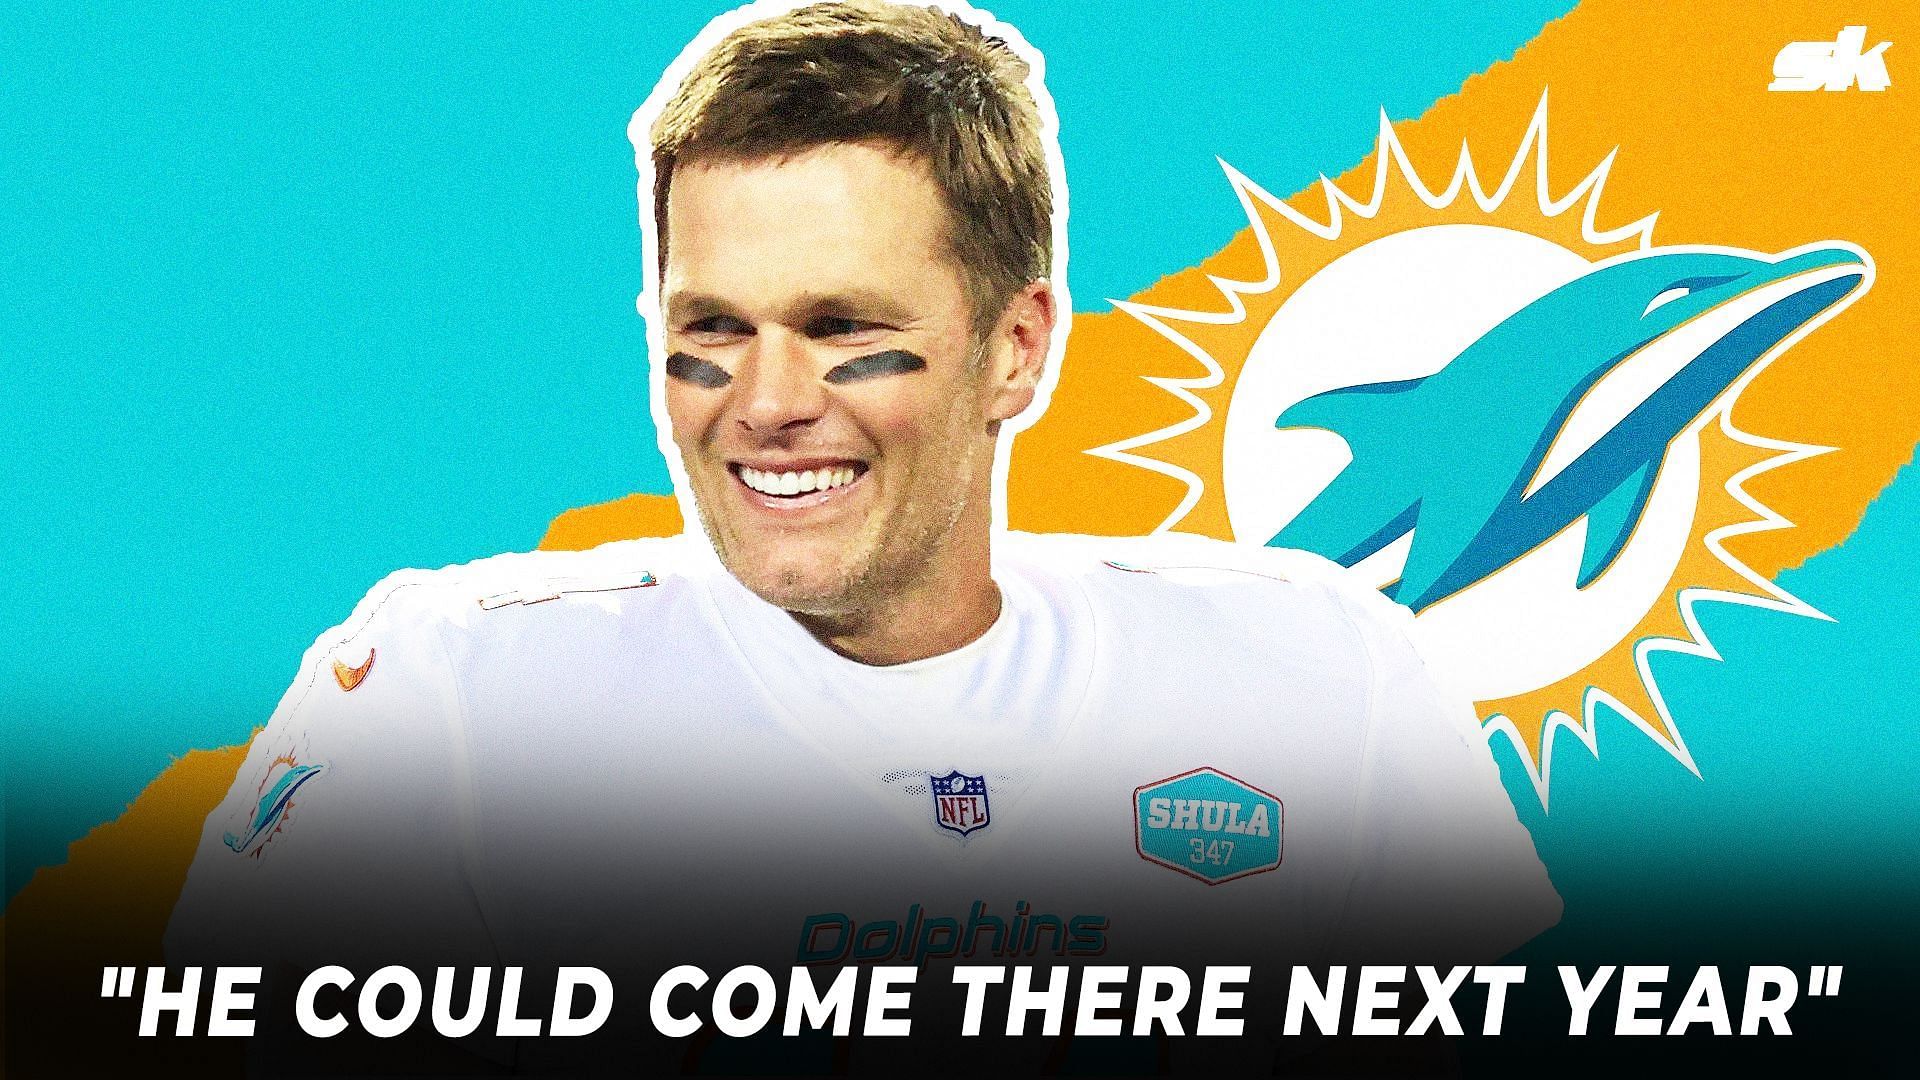 Tom Brady could end up partly owning Miami Dolphins and also playing for them.